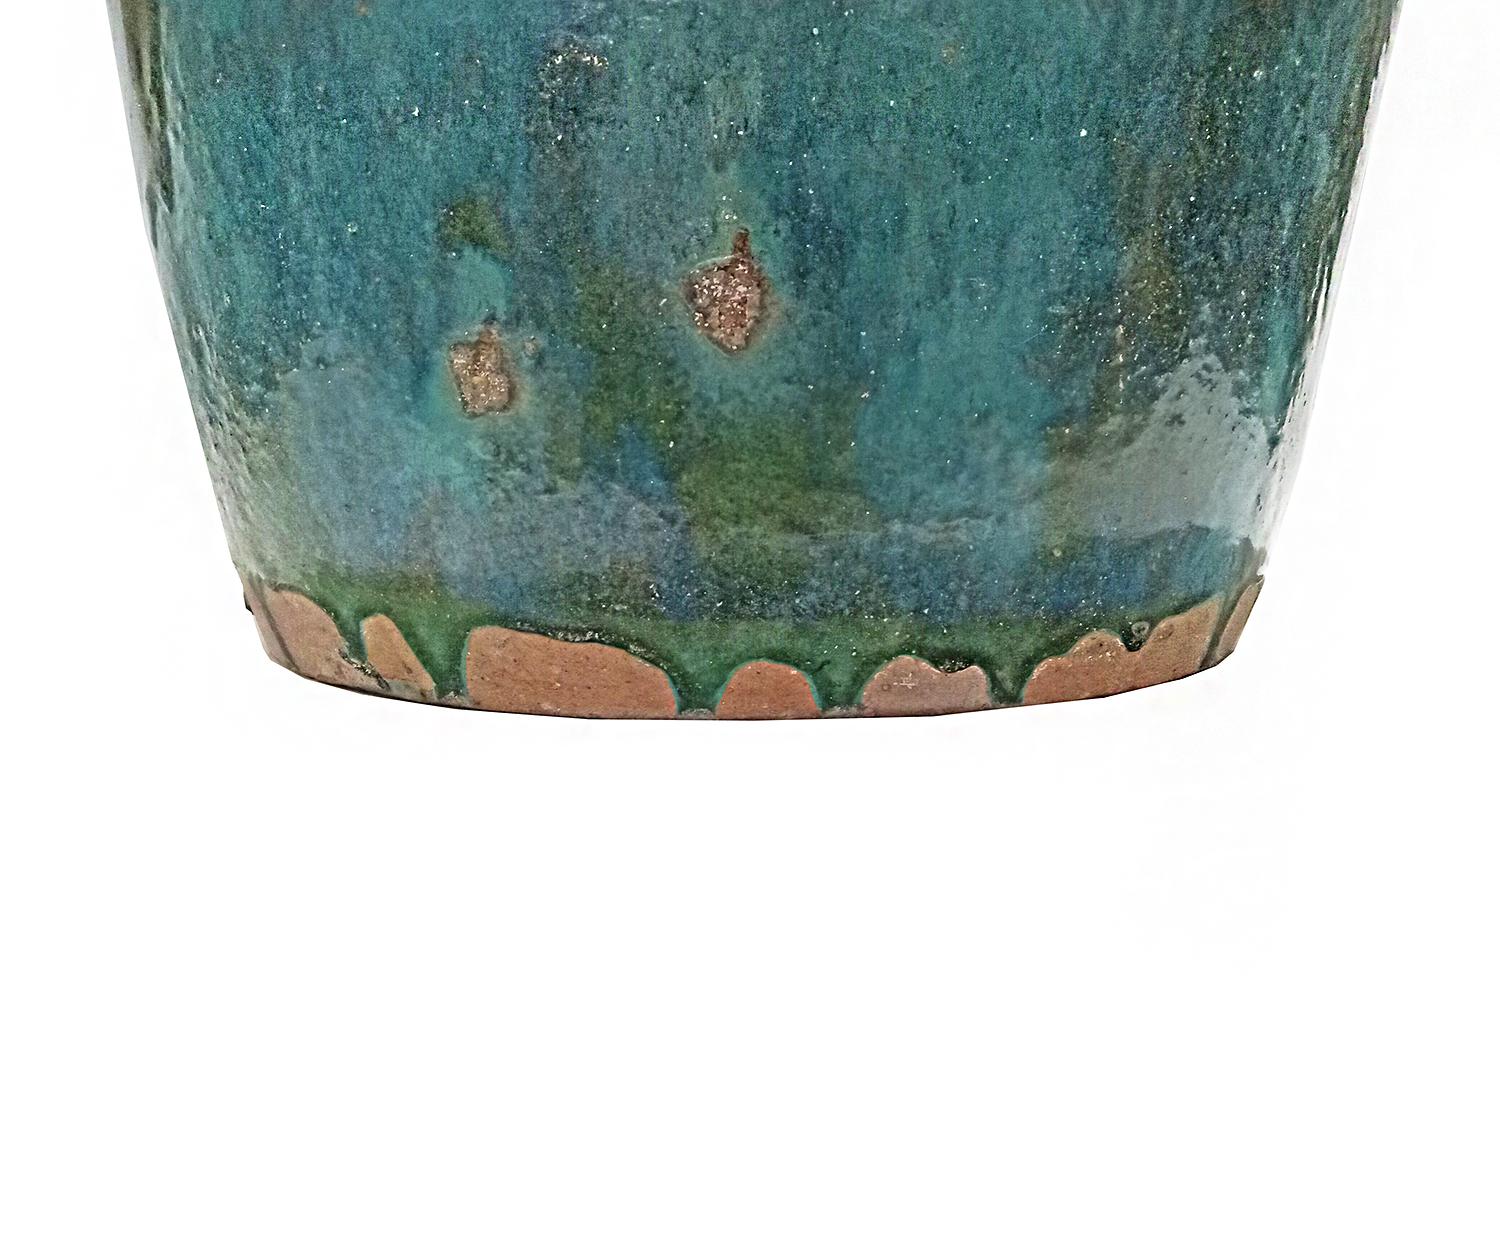 Balinese Terracotta Vase / Jar / Urn with Green Glaze, Contemporary For Sale 7